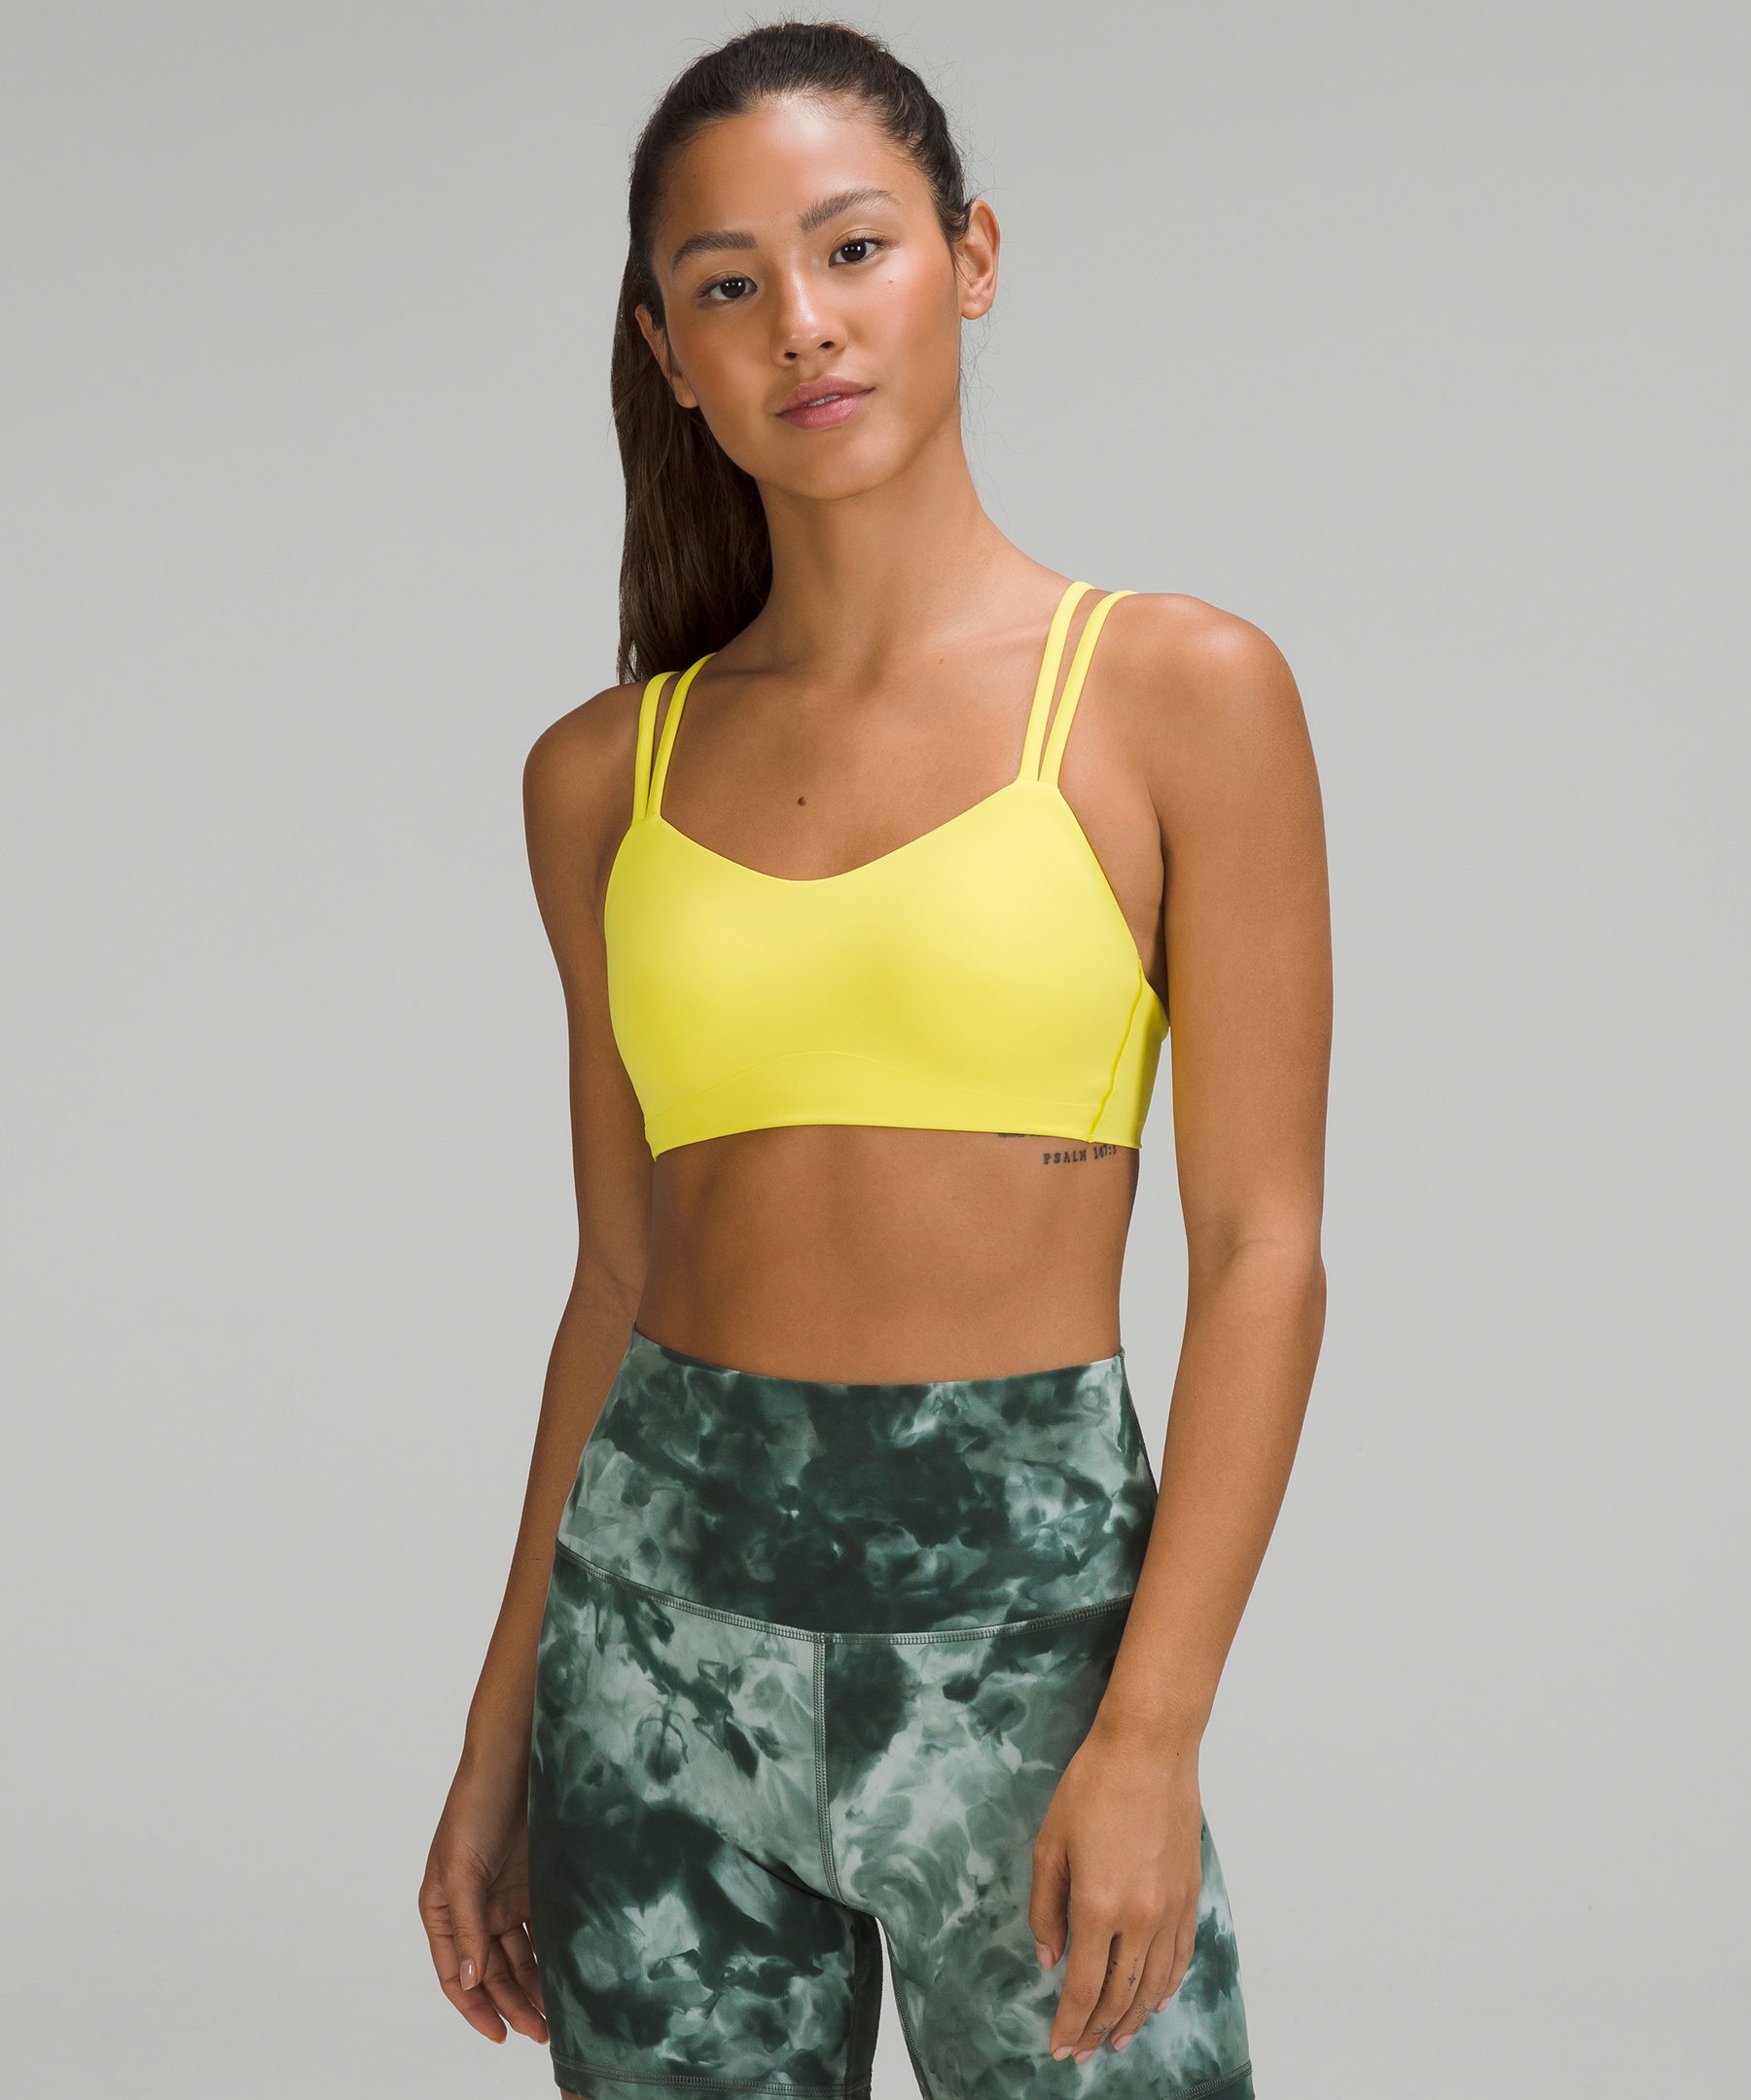 Kydra Athletics - Yellow is the warmest color 💛 What's your favourite  color? Comment with a ♥💙💚💛💜🧡🖤🤍 👚: Core Bra in Yuzu and Kyro Leggings  in Ash Navy 📷: @meldadana #kydrarewards #explorekydra #kydraactivewear  #explorekyro #kydrasquad